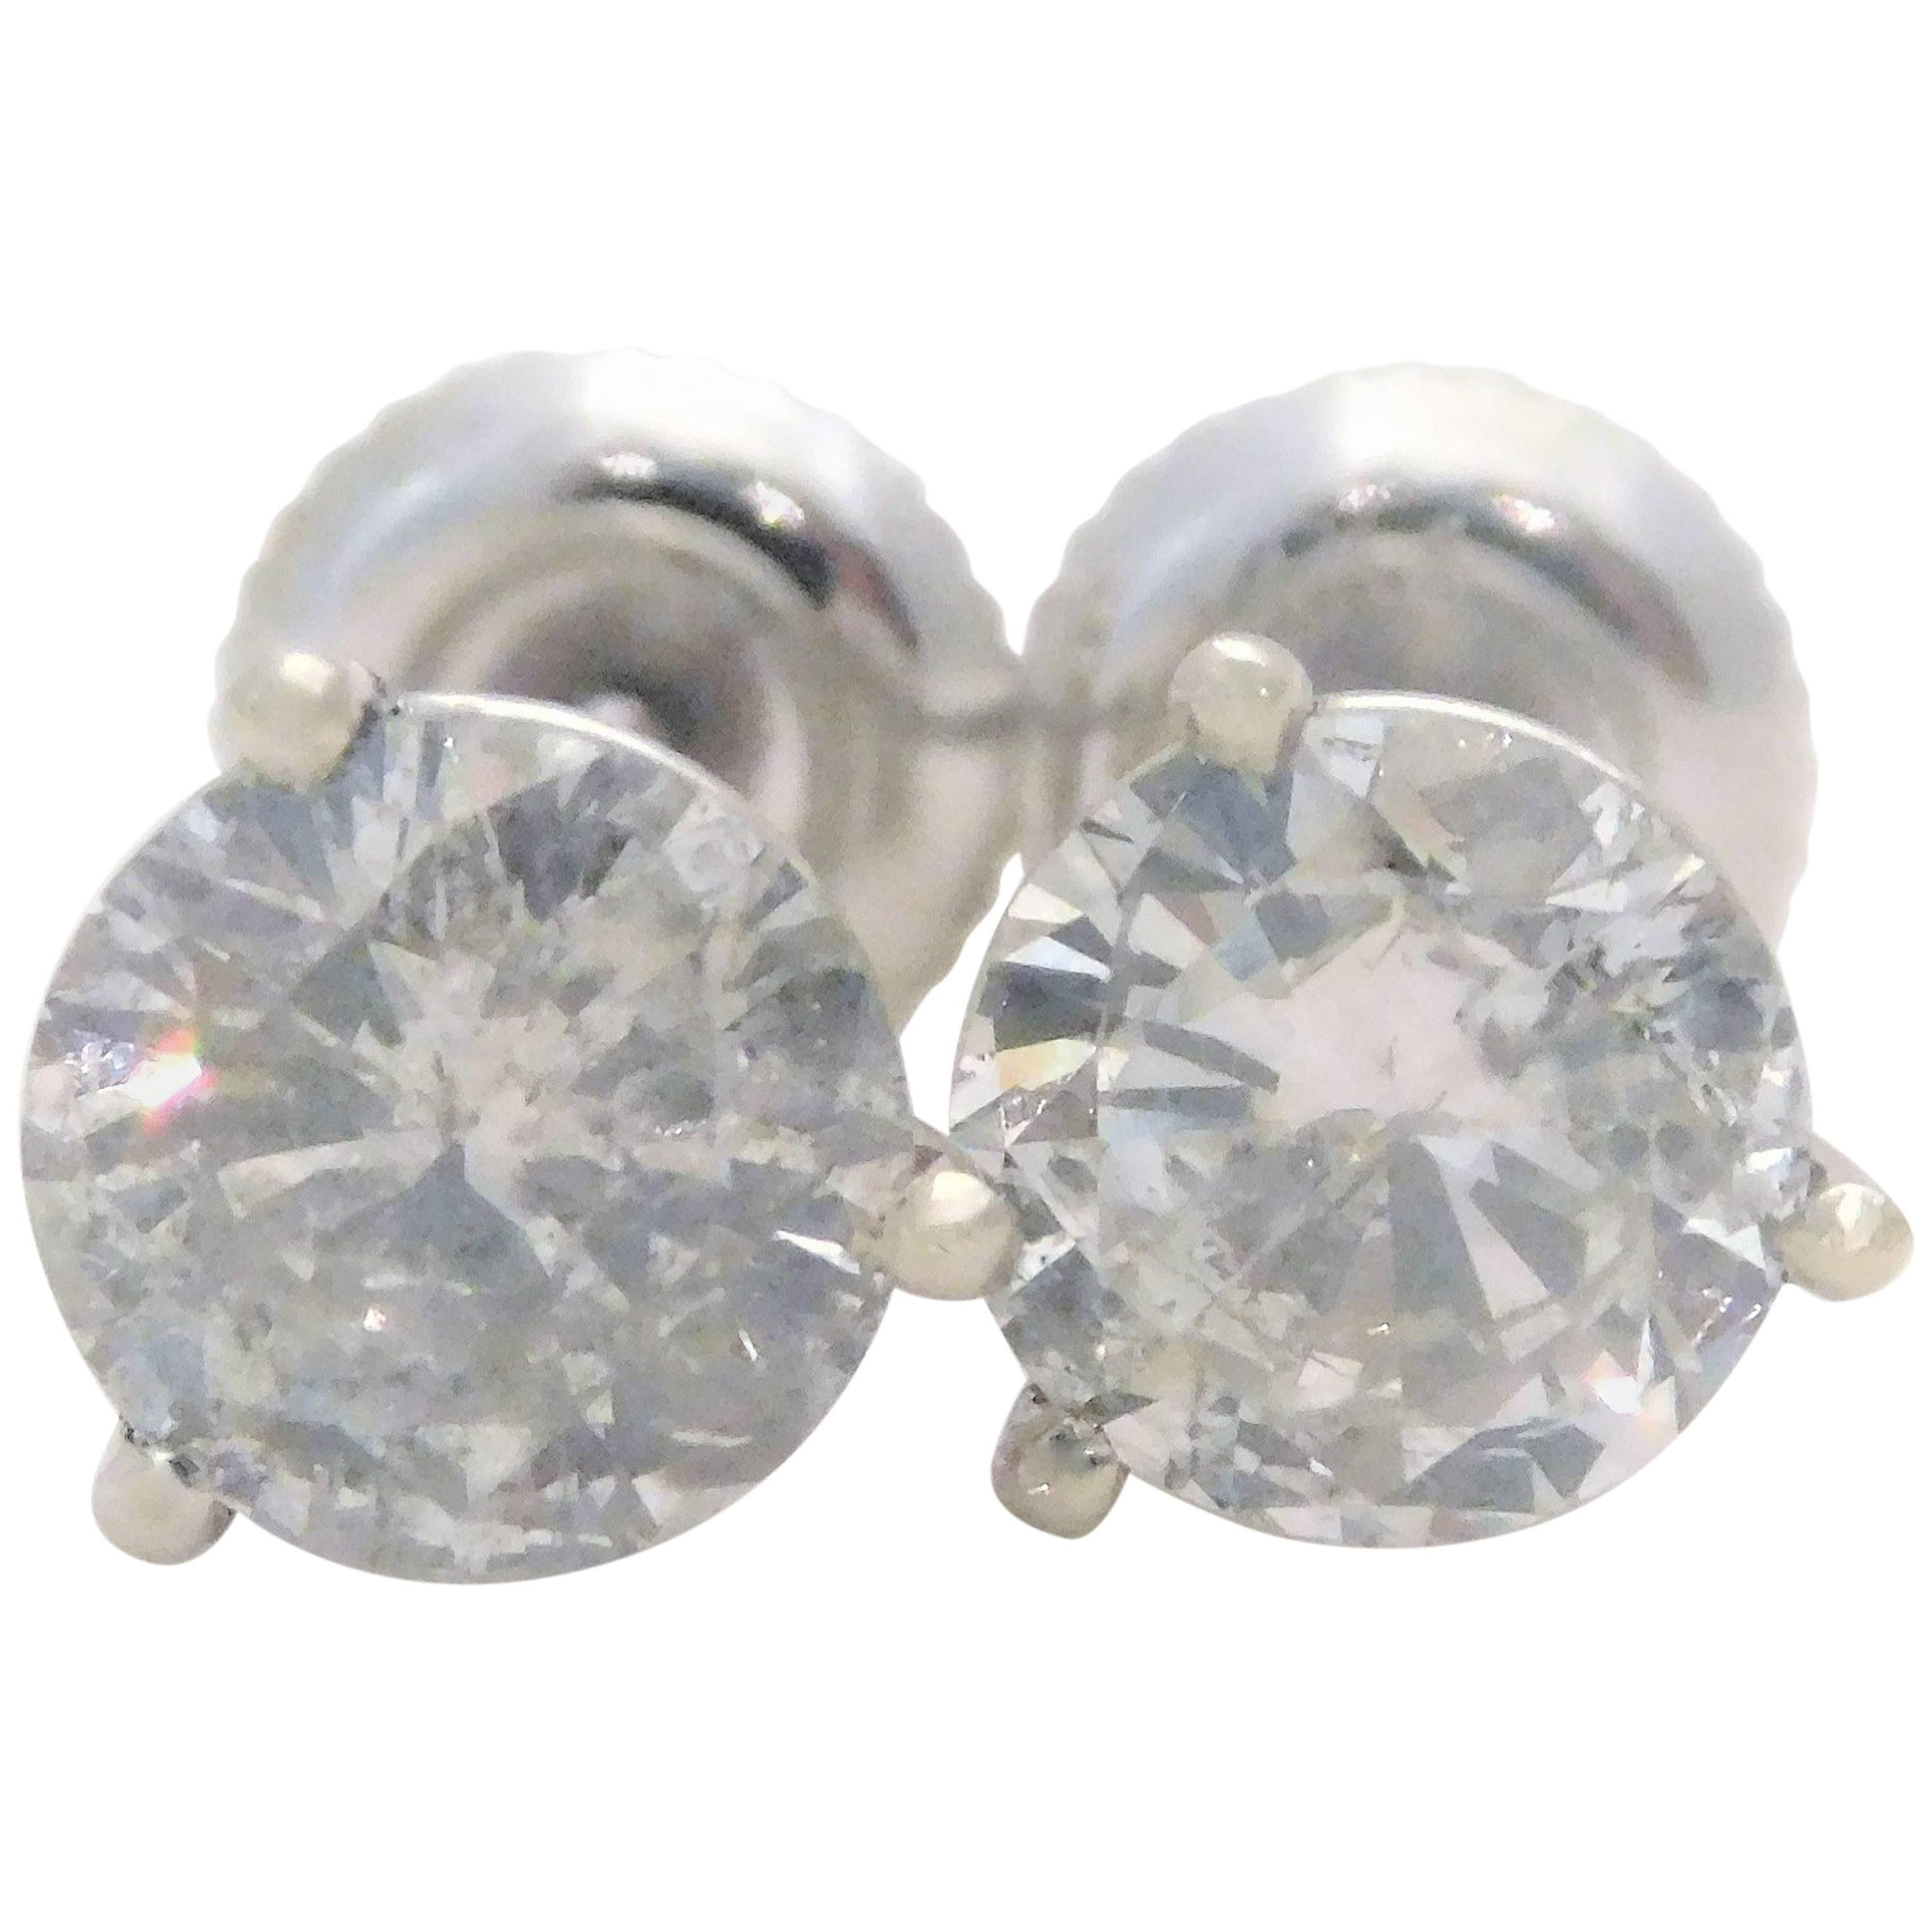 2.12 Carat Total Weight Diamond Stud Earrings For Sale